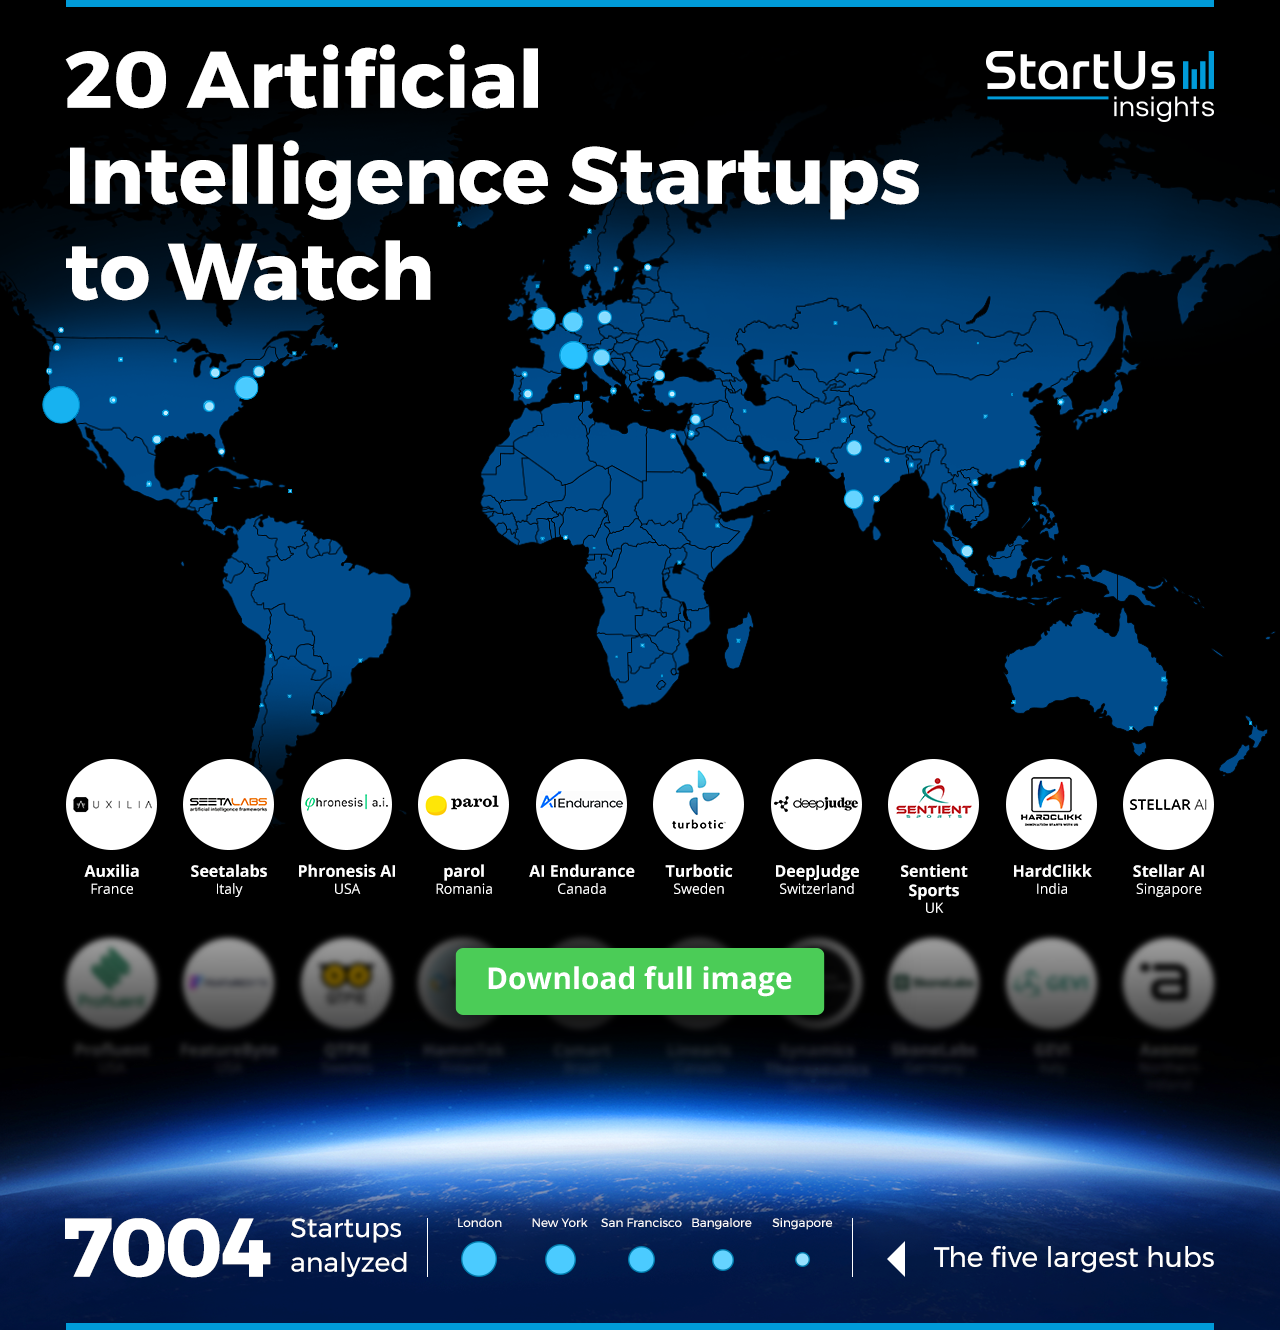 Artificial-Intelligence-Startups-to-Watch-Heat-Map-Blurred-StartUs-Insights-noresize